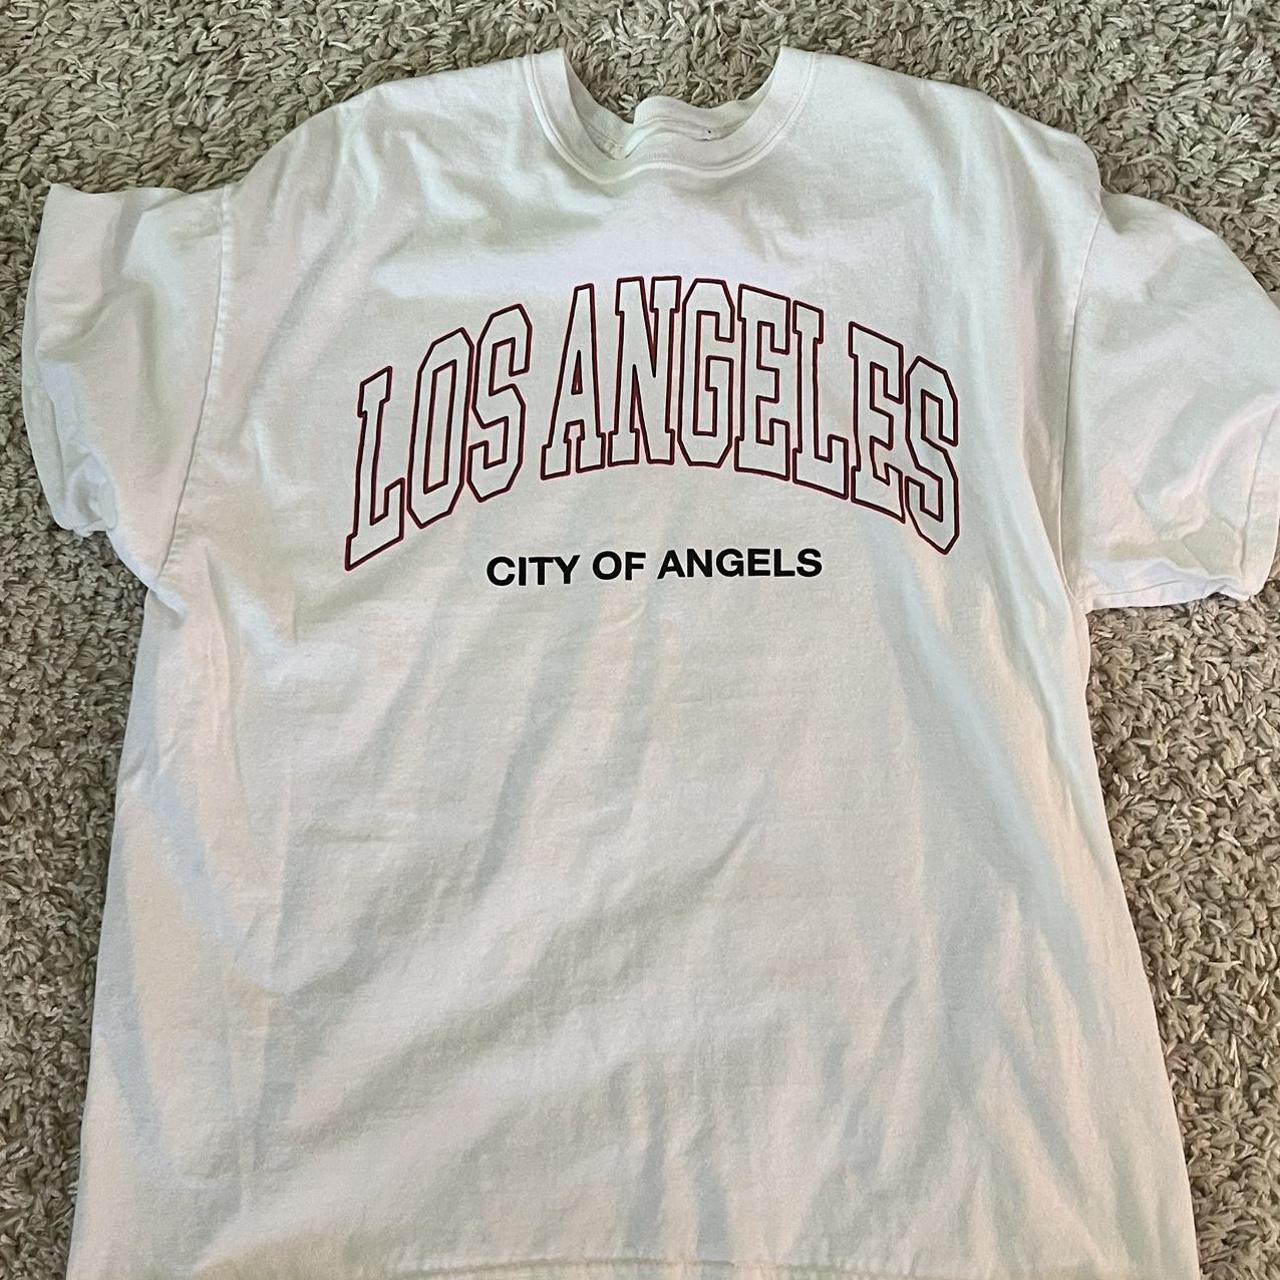 PacSun Men's City of Angels T-Shirt - Black Size Small